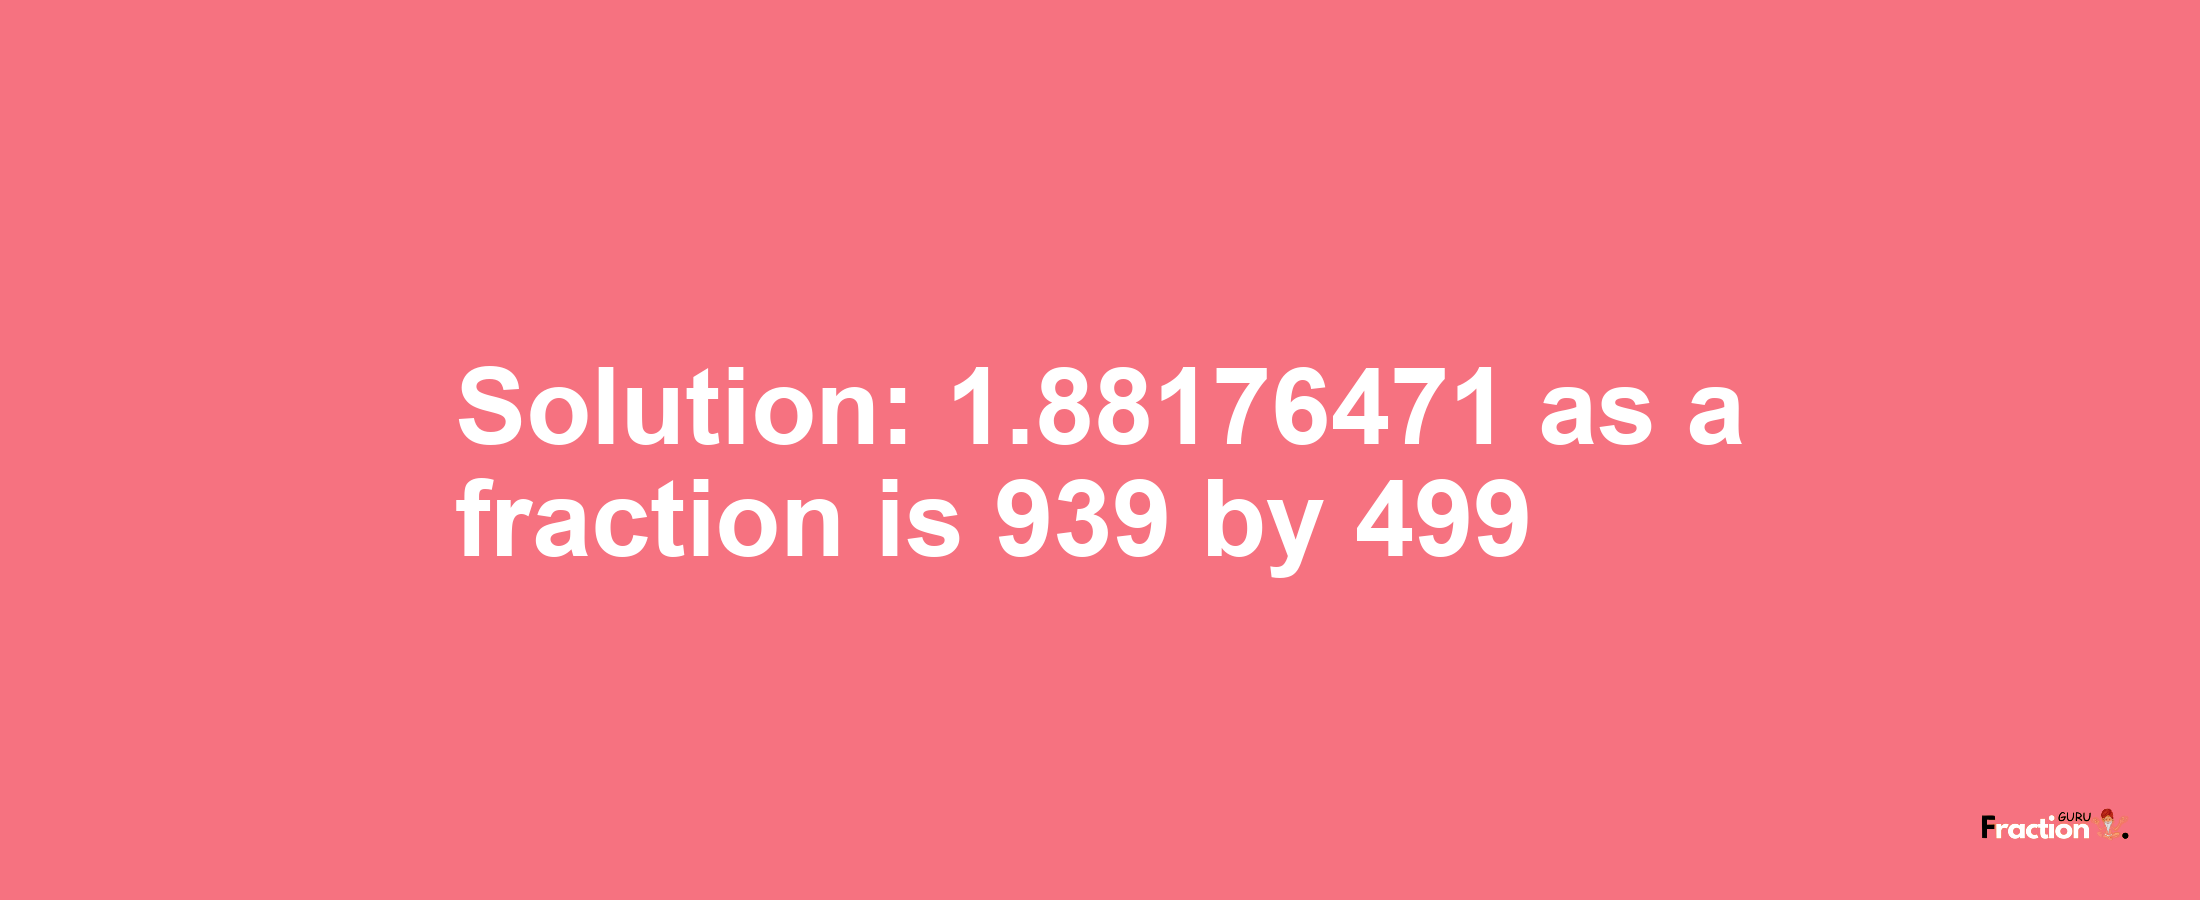 Solution:1.88176471 as a fraction is 939/499